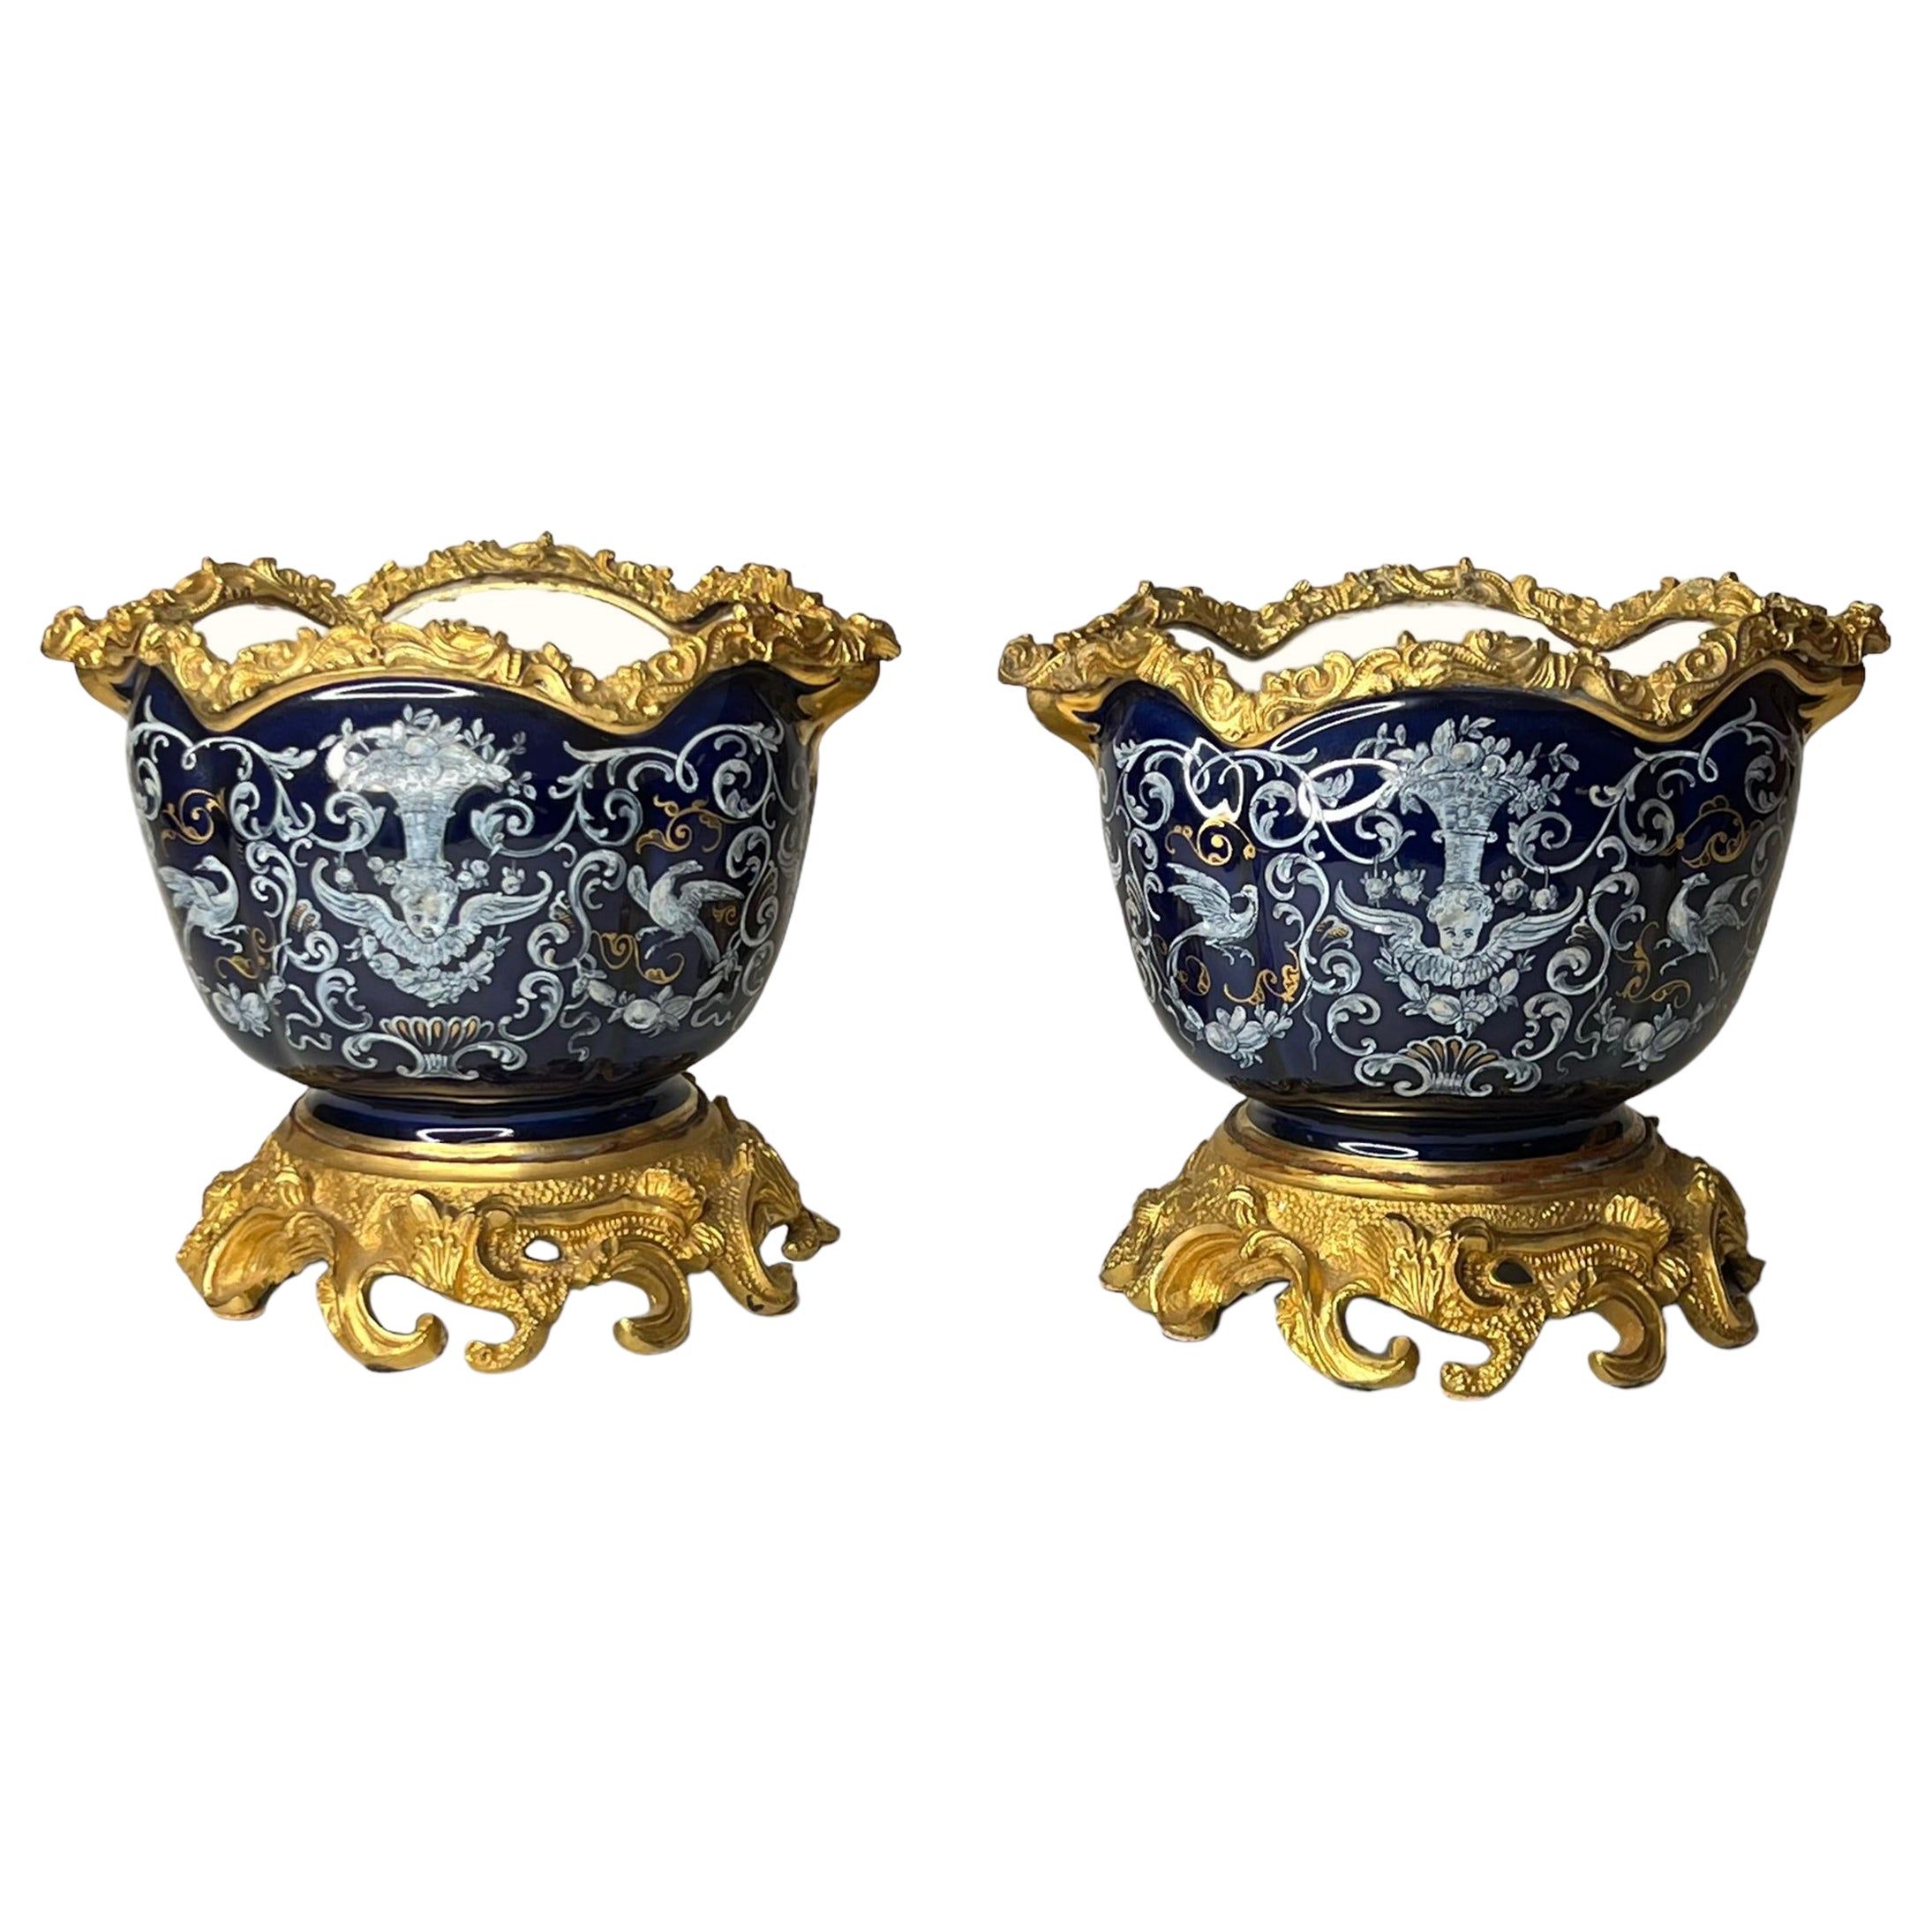 Pair Gilt Bronze Mounted Porcelain Cachepots with Neoclassical Grisaille Designs